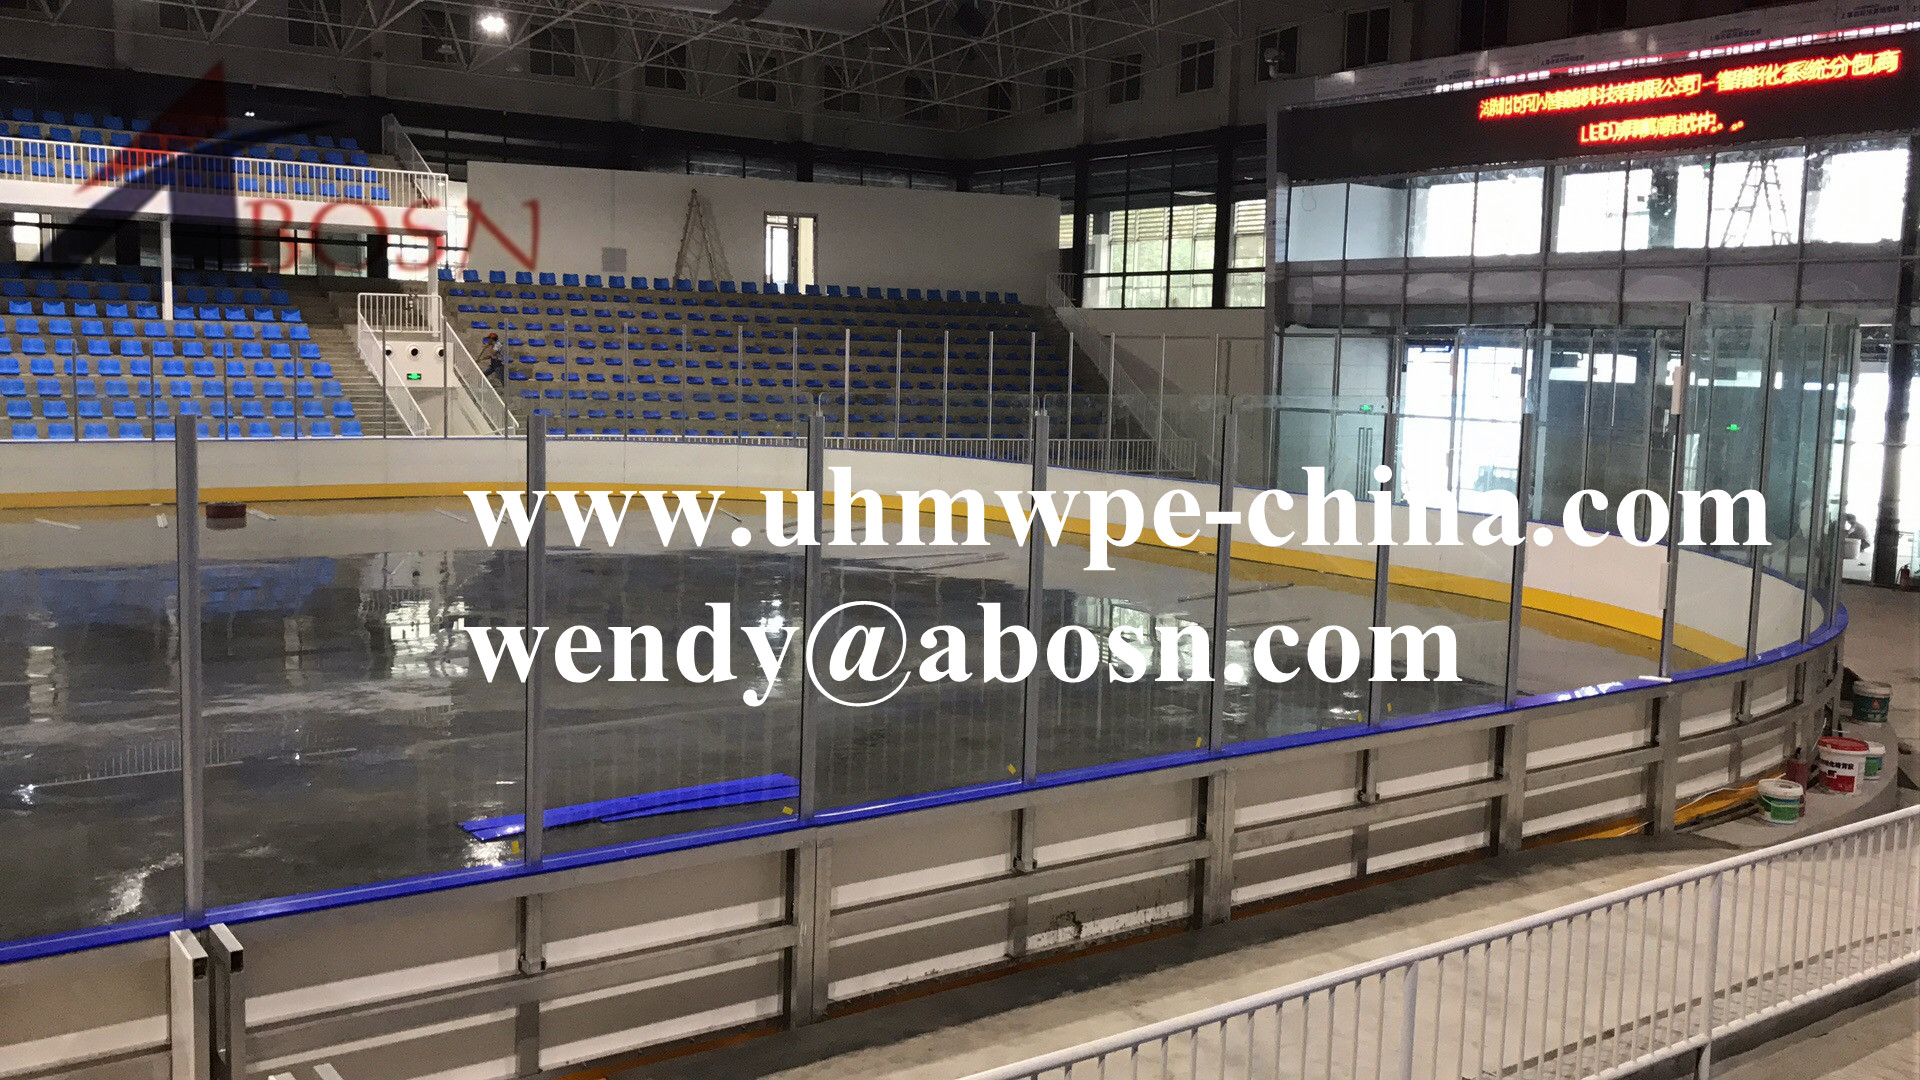 Ice Arena Dasher Board System